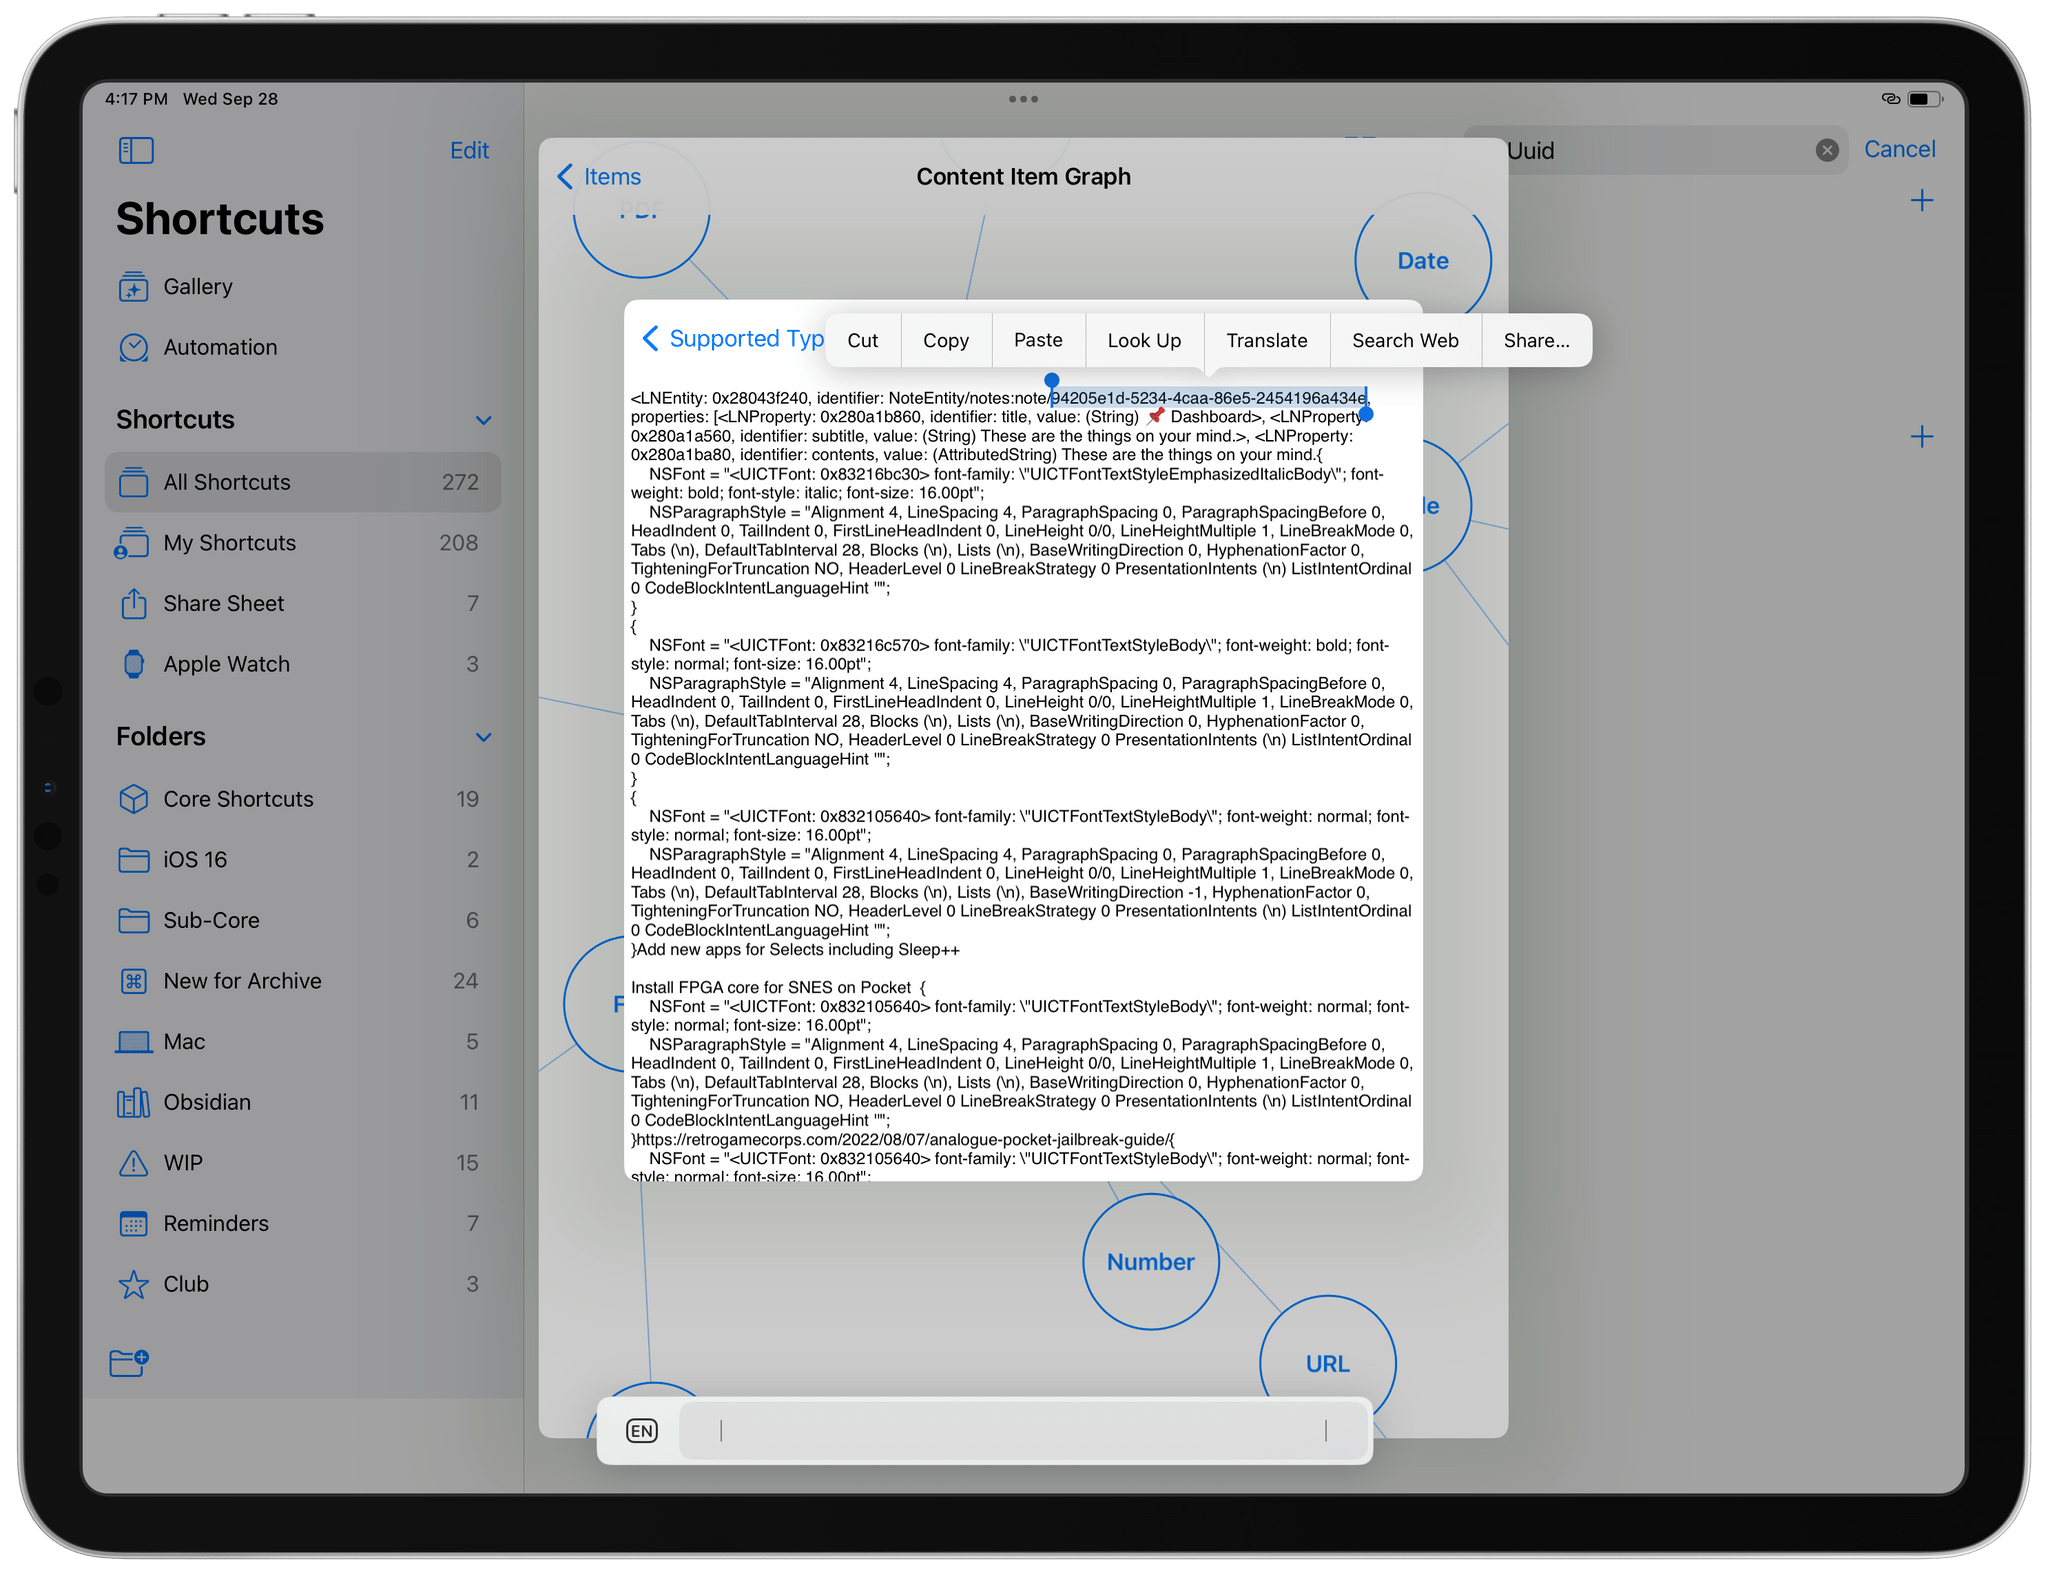 Once again, this part is the UUID of a note. Select it and reprinting it to the clipboard. This is the only way to get this detail out of Shortcuts.